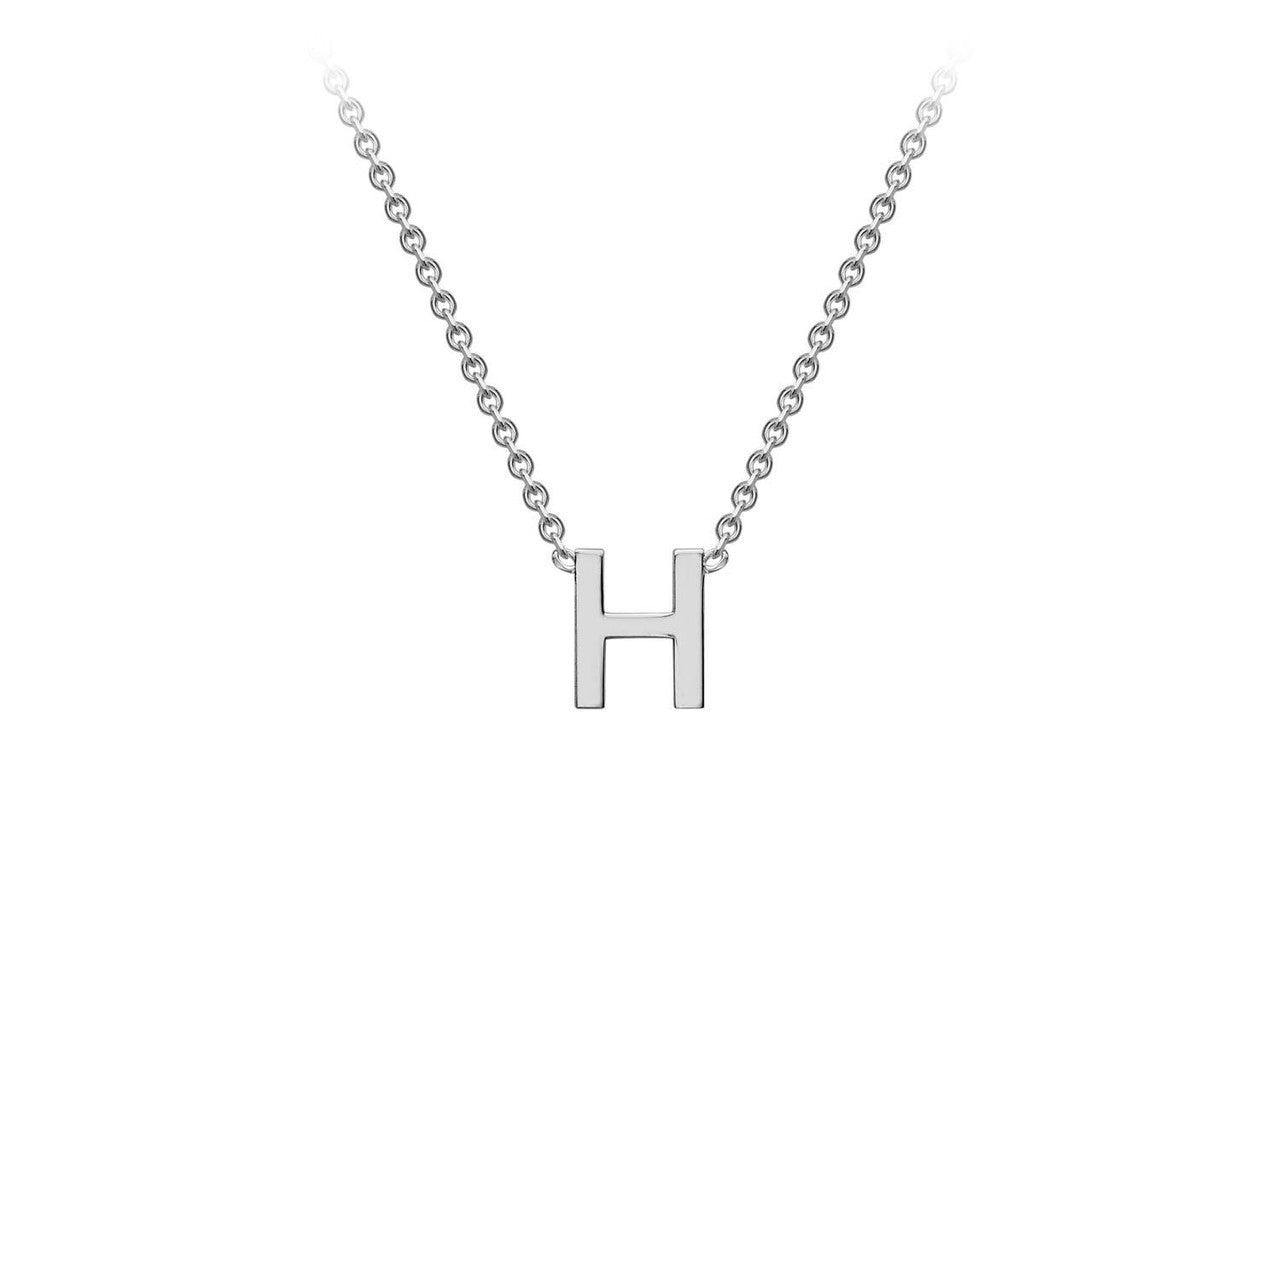 Ice Jewellery 9K White Gold 'H' Initial Adjustable Letter Necklace 38/43cm - 5.19.0157 | Ice Jewellery Australia